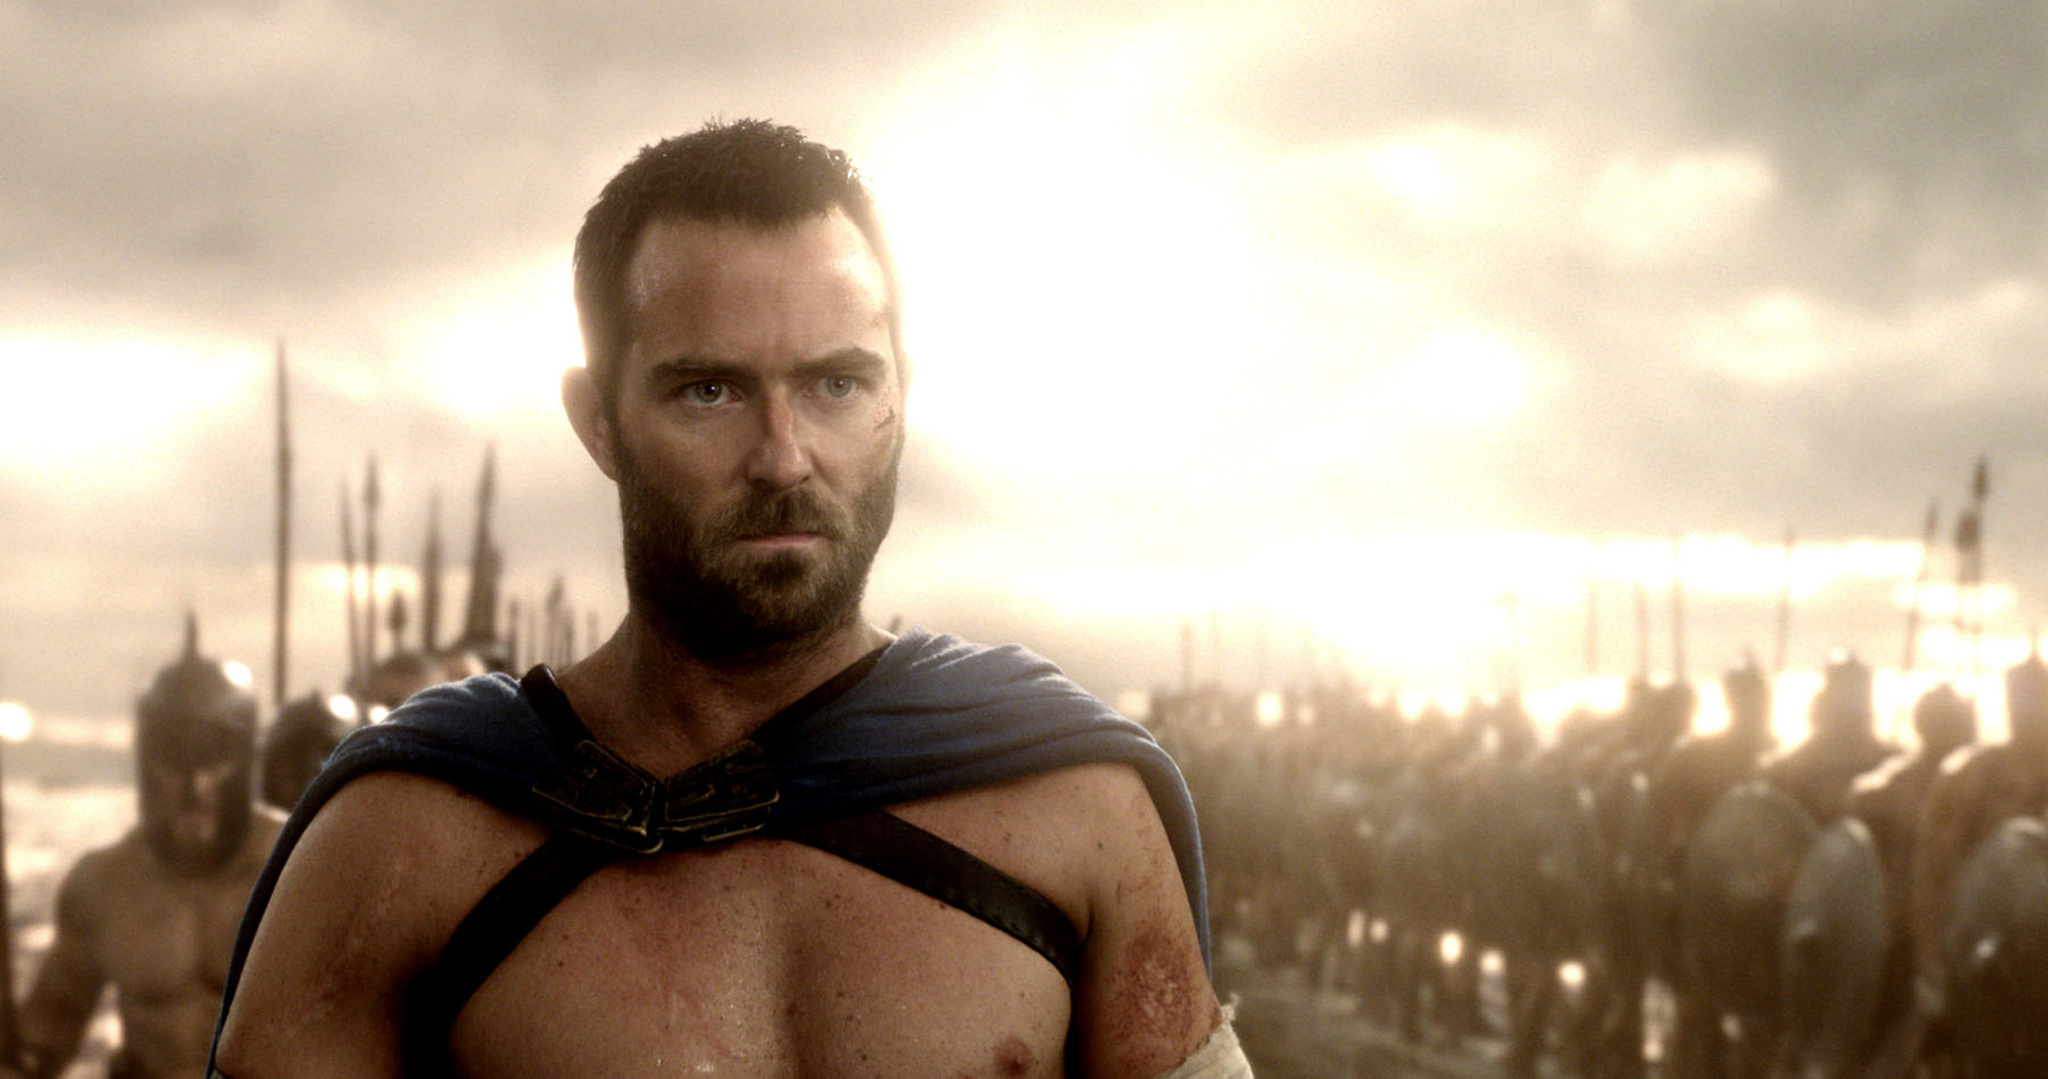 Sullivan Stapleton as Themistokles in Warner Bros. Pictures' and Legendary Pictures' action adventure 300: Rise Of An Empire, a Warner Bros. Pictures release.